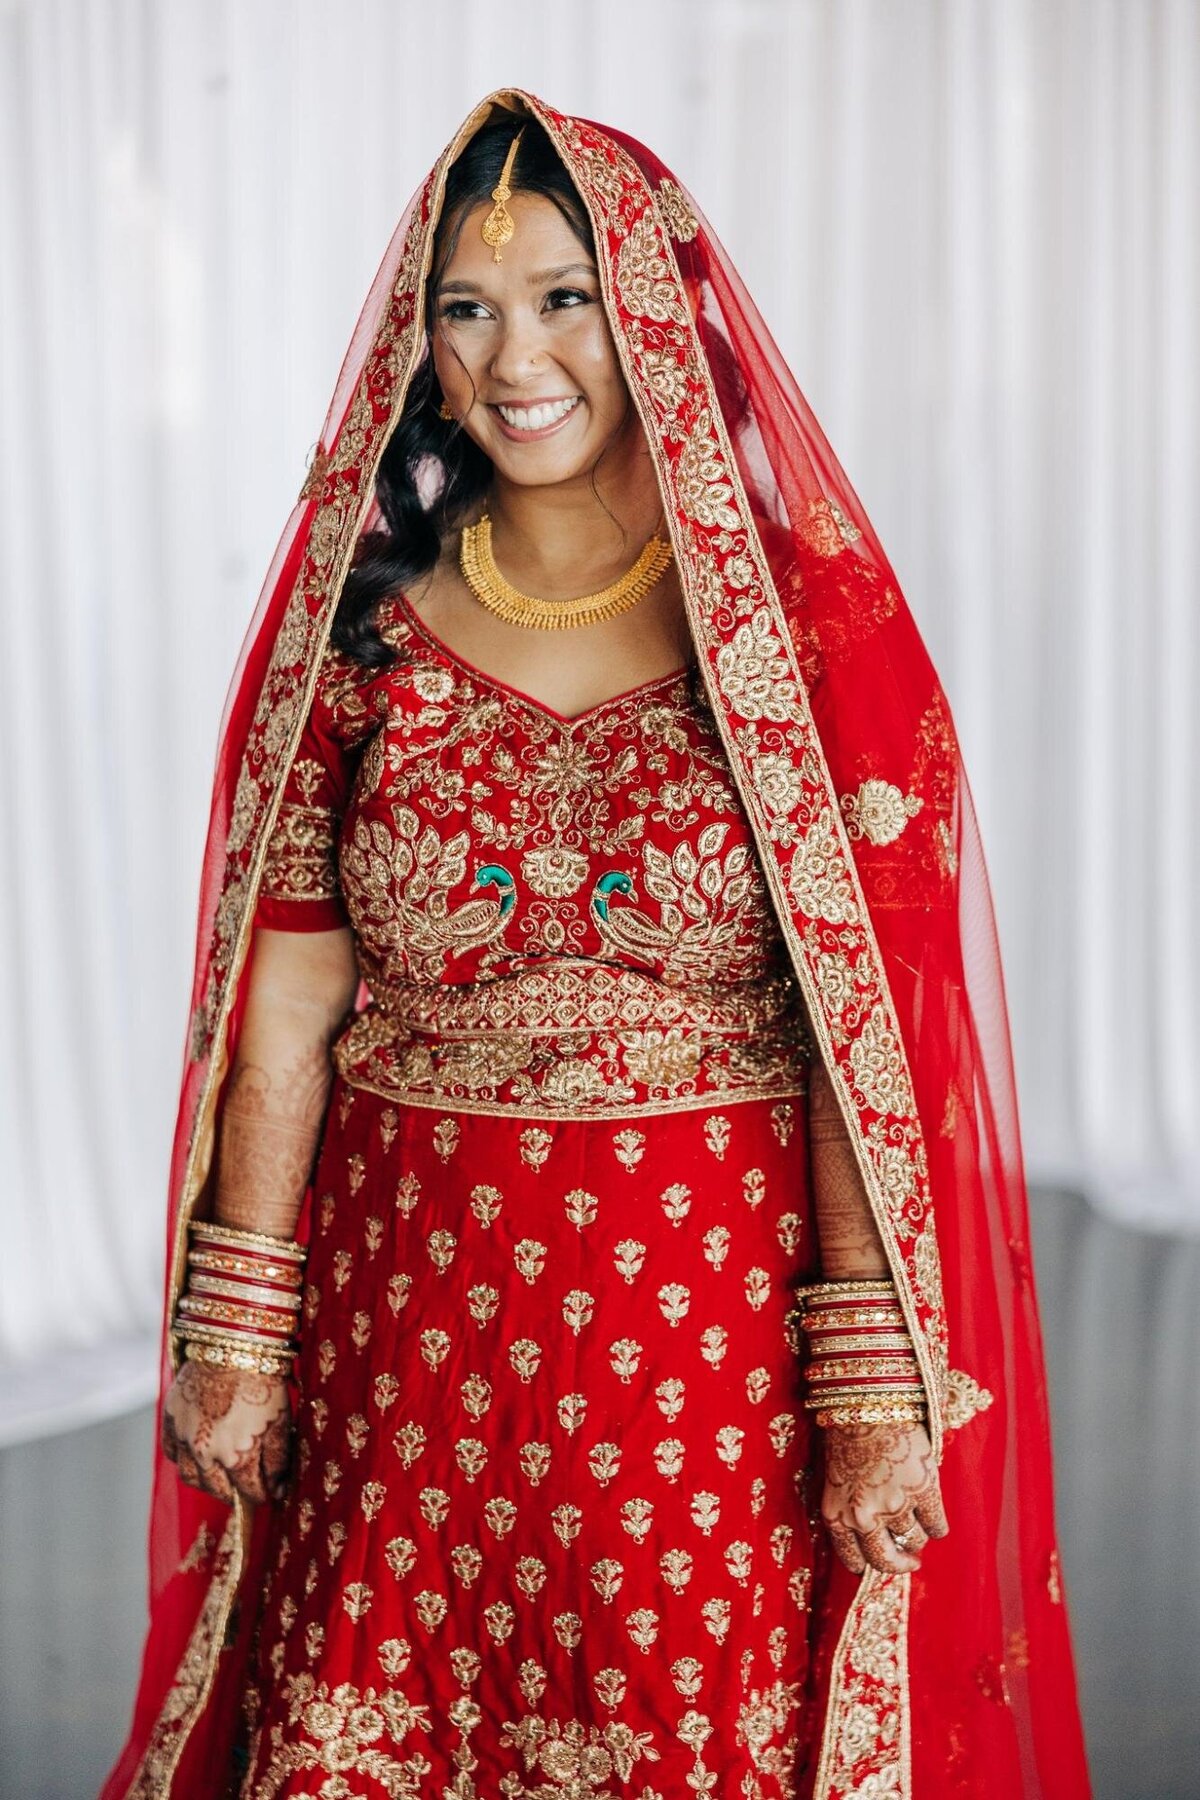 A smiling bride dressed in a traditional red and gold embroidered lehenga with her head covered by a veil.